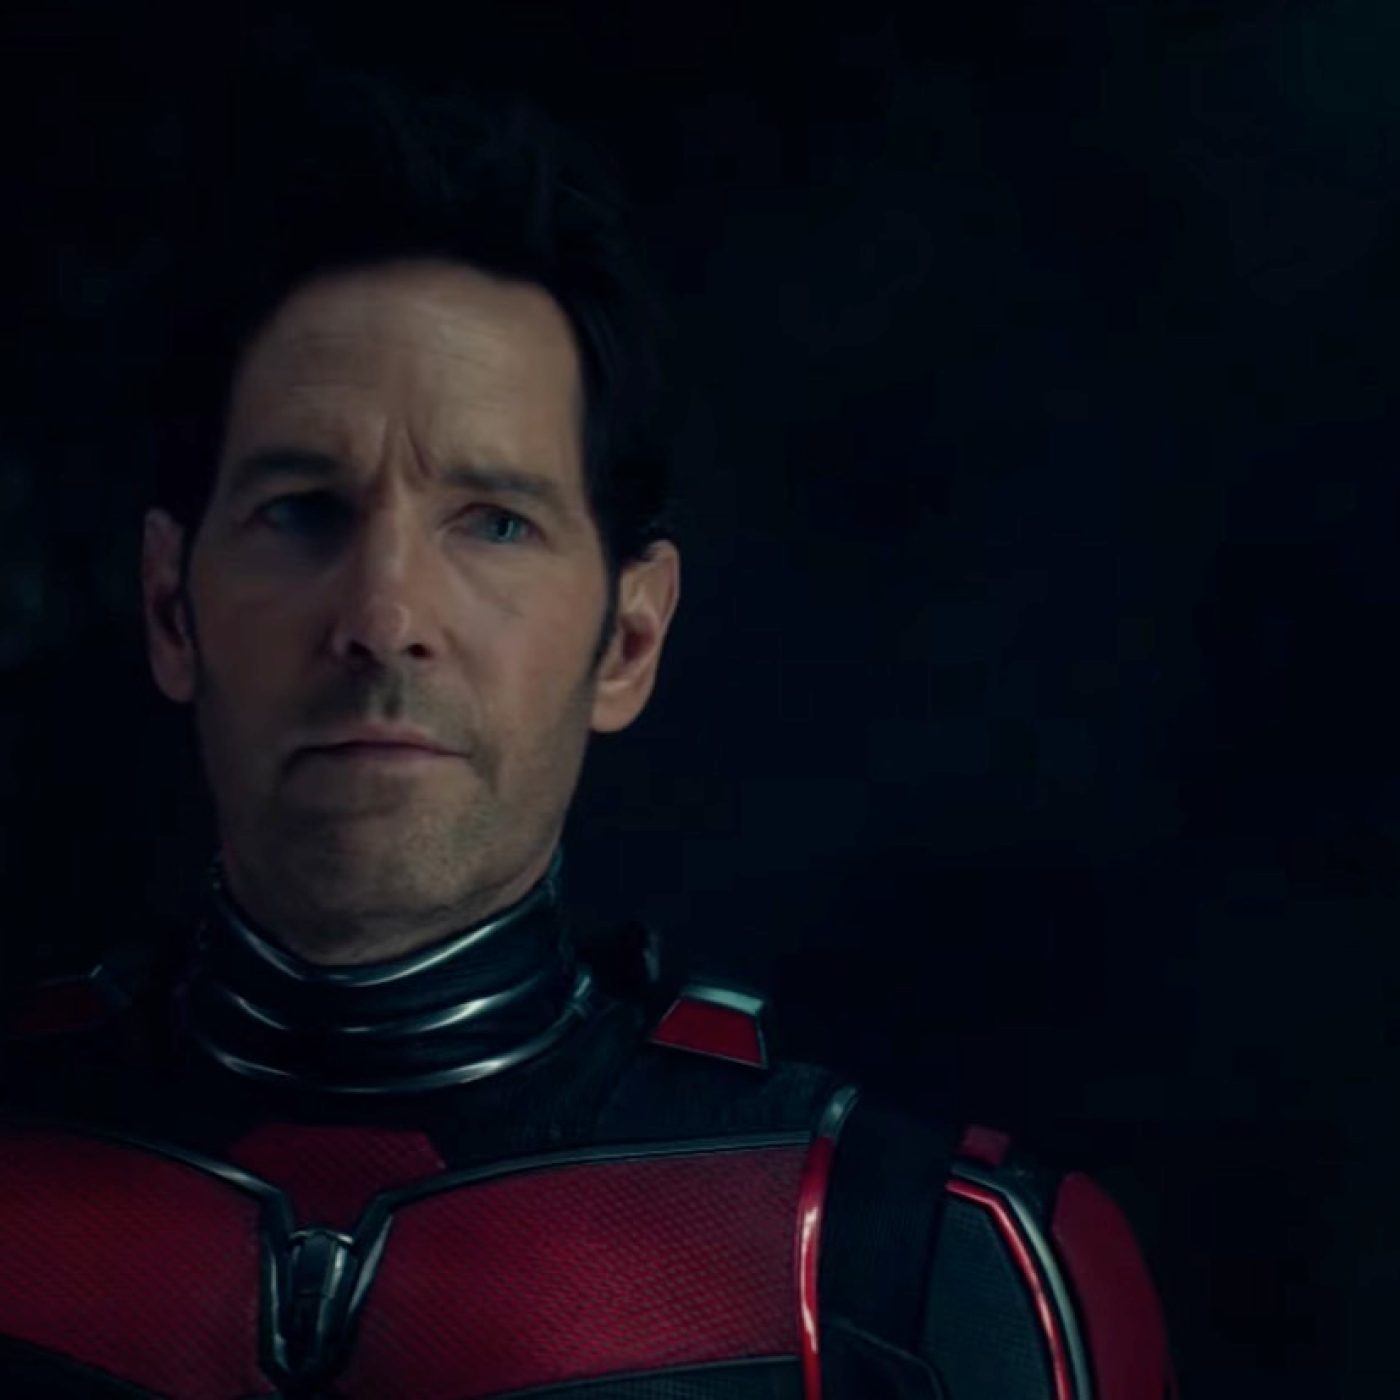 The 'Ant-Man and Wasp: Quantumania' Trailer Puts Kang the